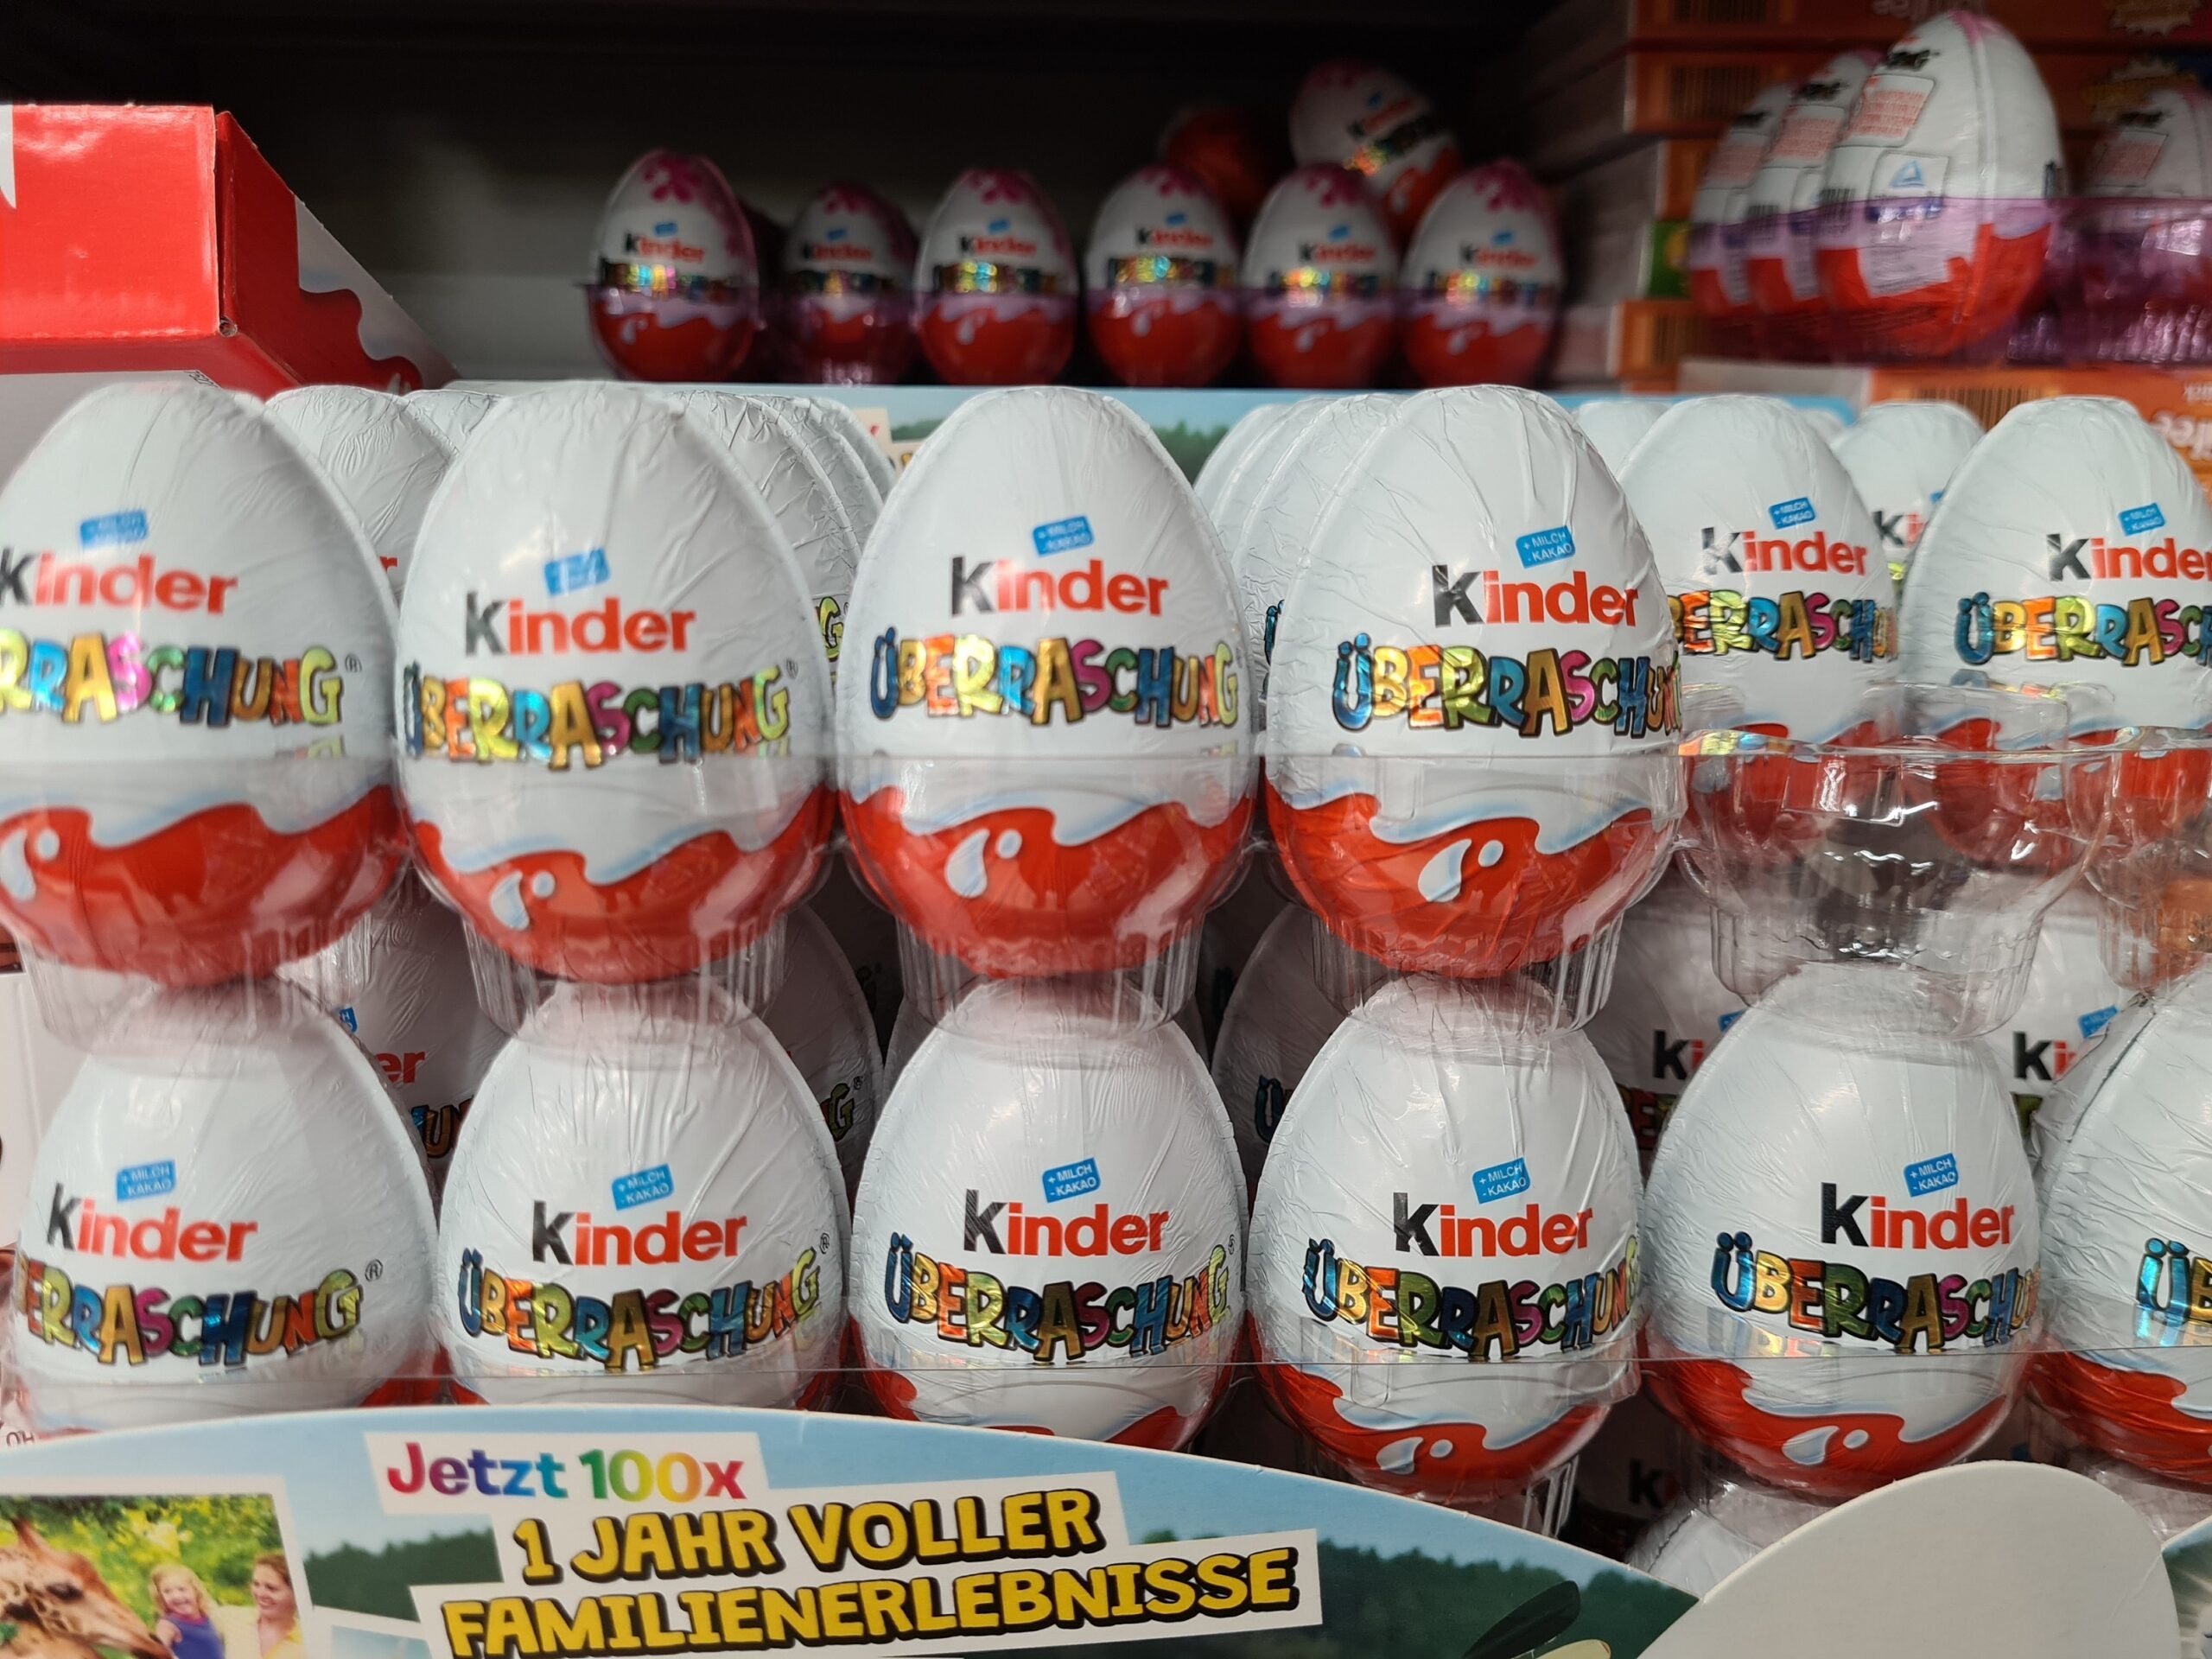 Ferrero confirms Kinder Surprise products have returned to UK